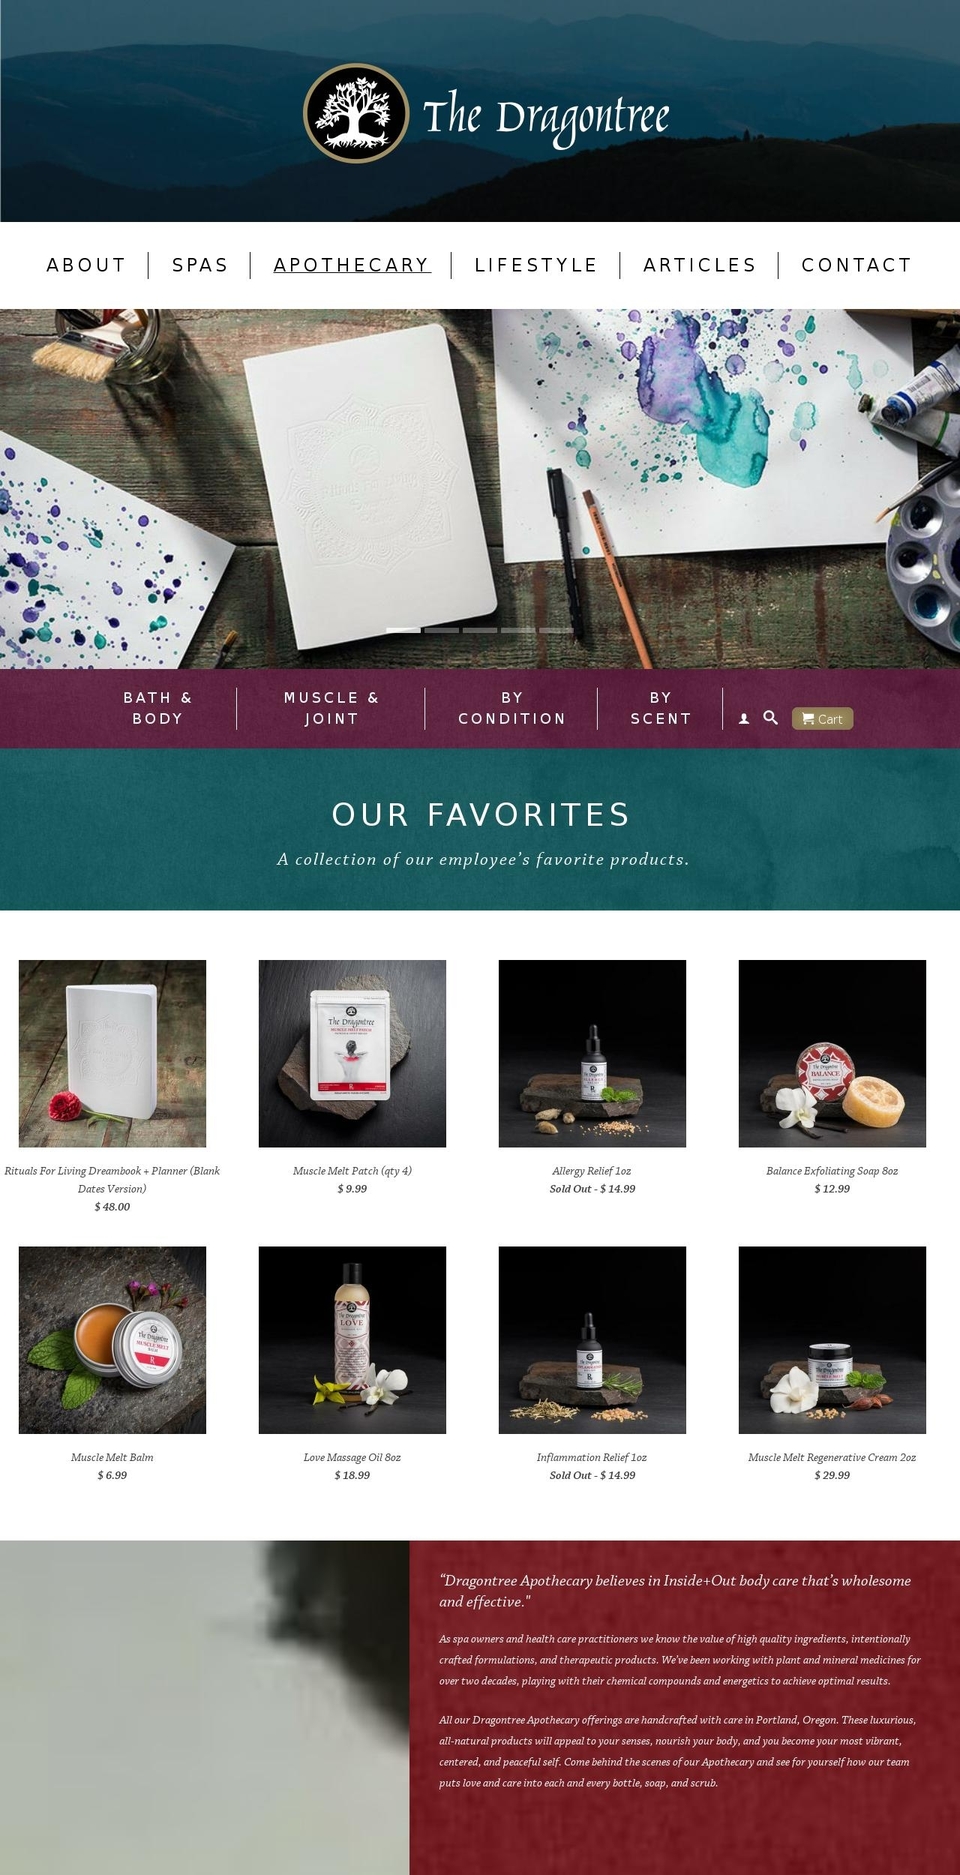 Dawn Shopify theme site example dragontreeapothecary.com